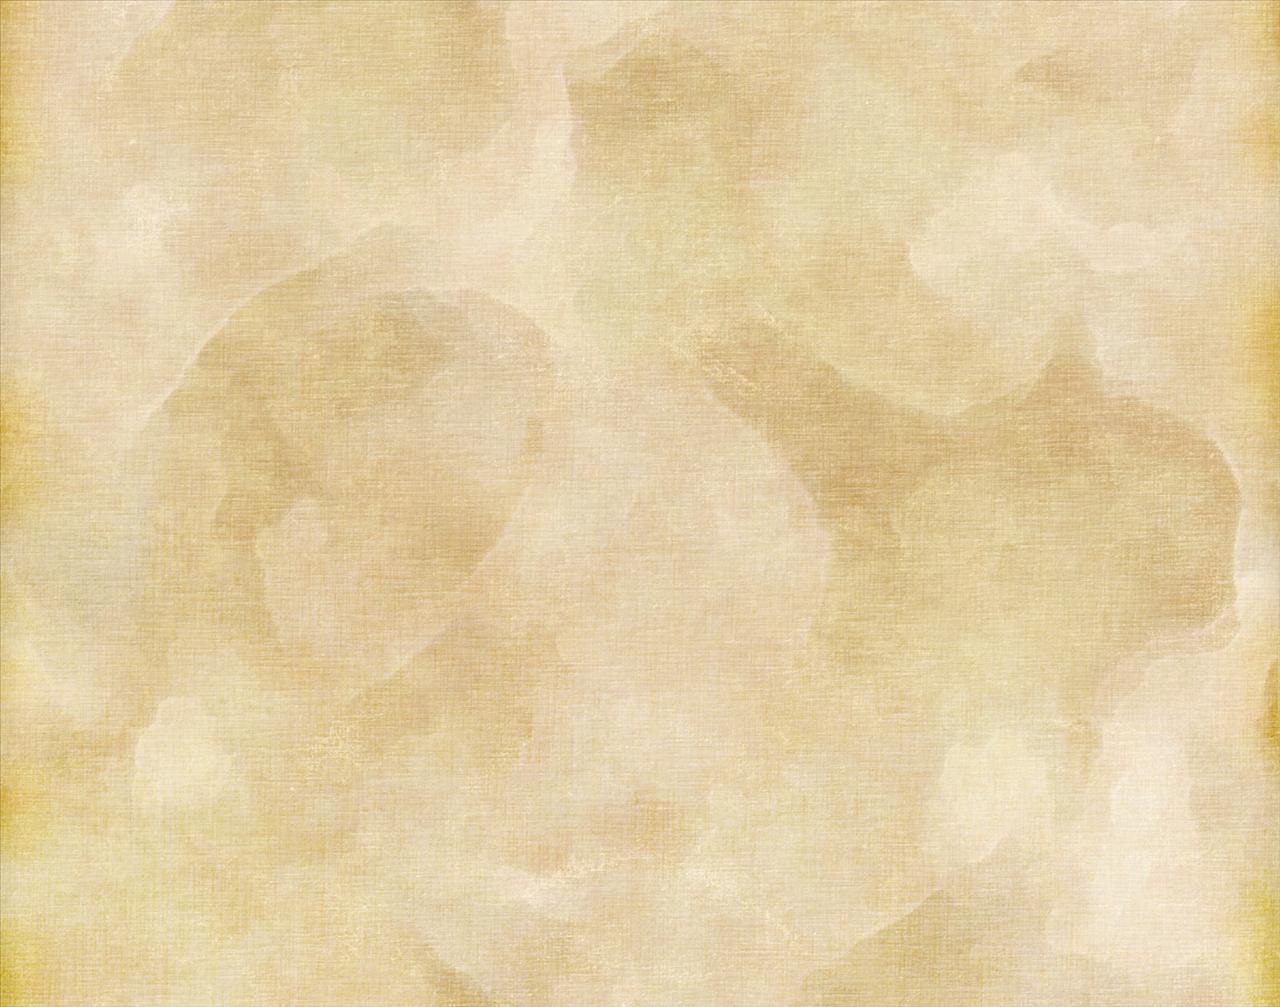 Neutral soft backgrounds